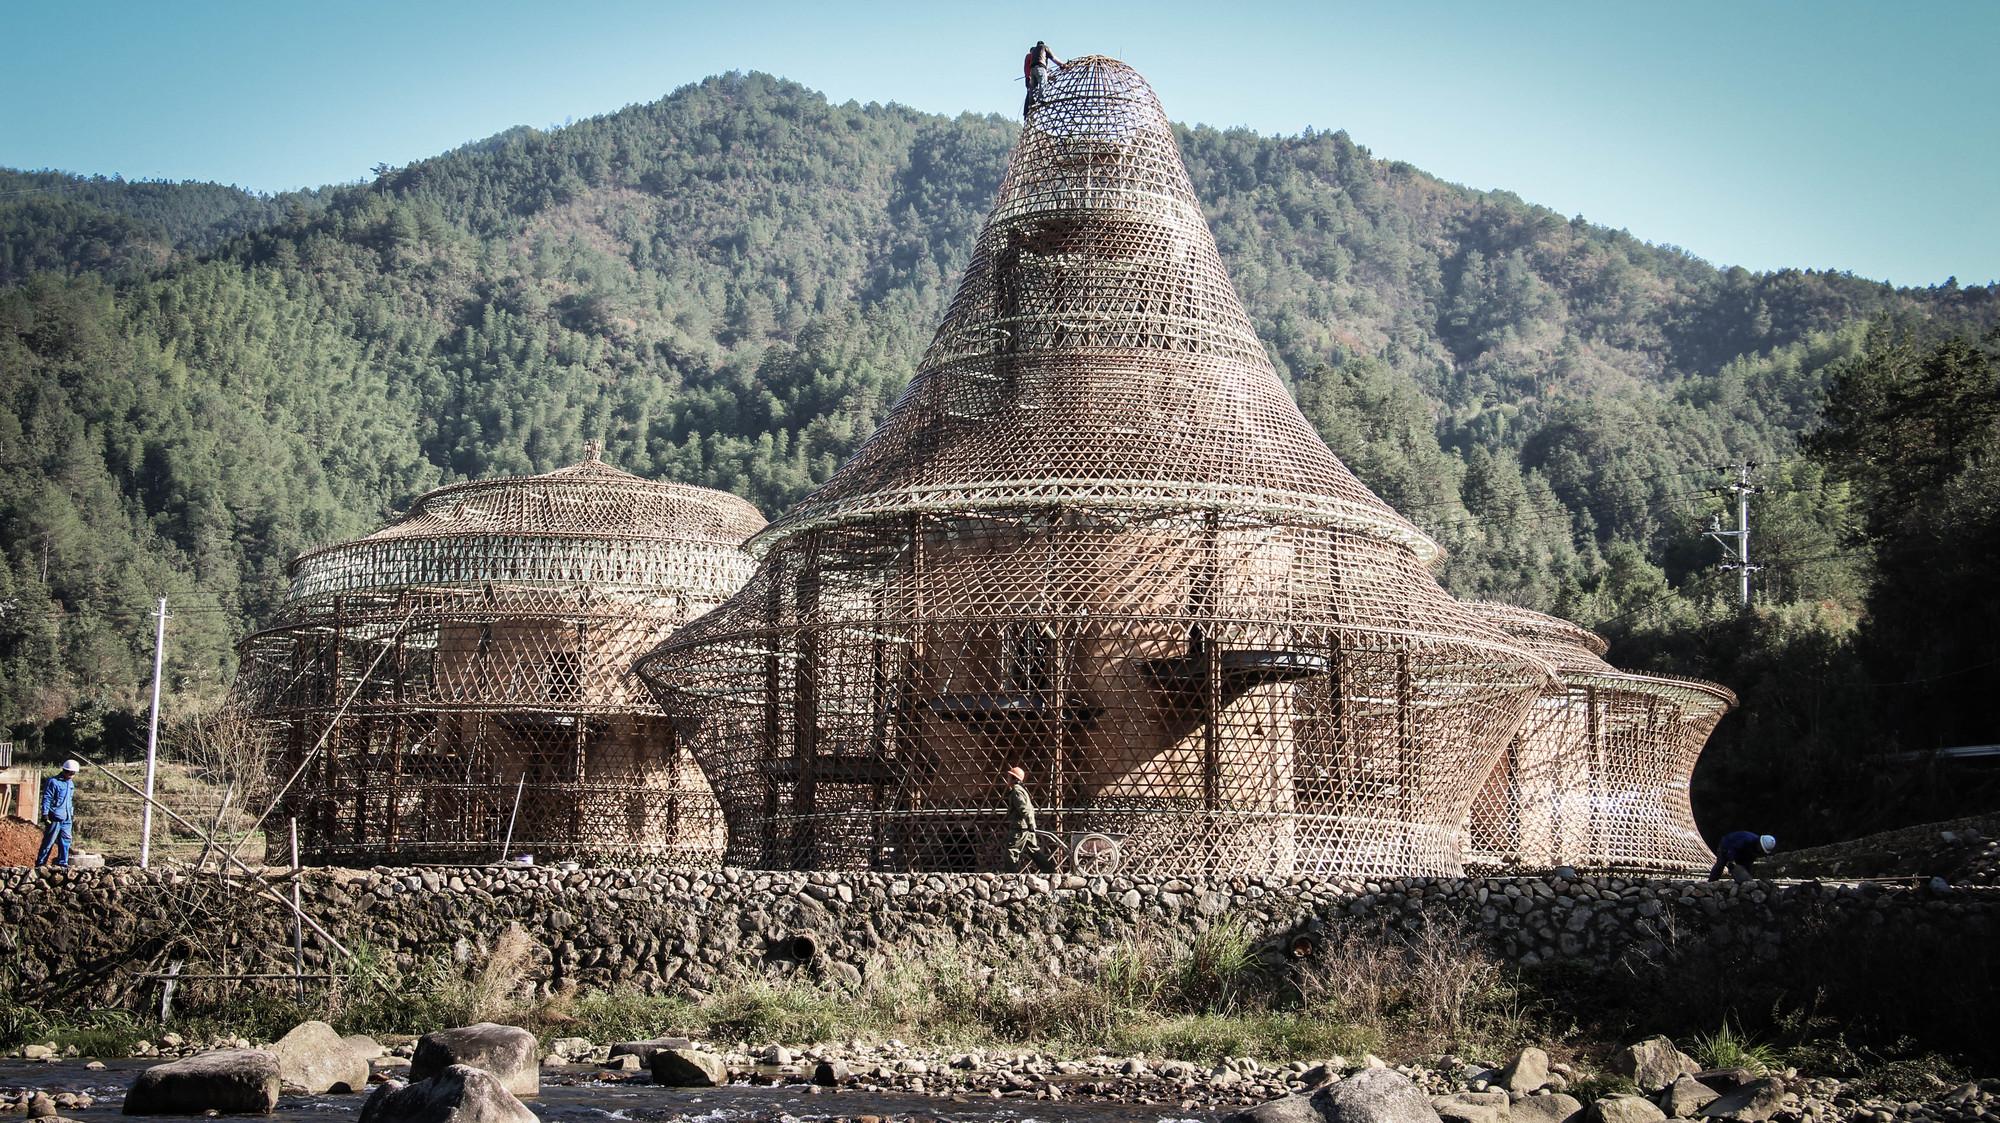 Three Hostels In Baoxi, China: A Bamboo Haven Of Innovation And Community